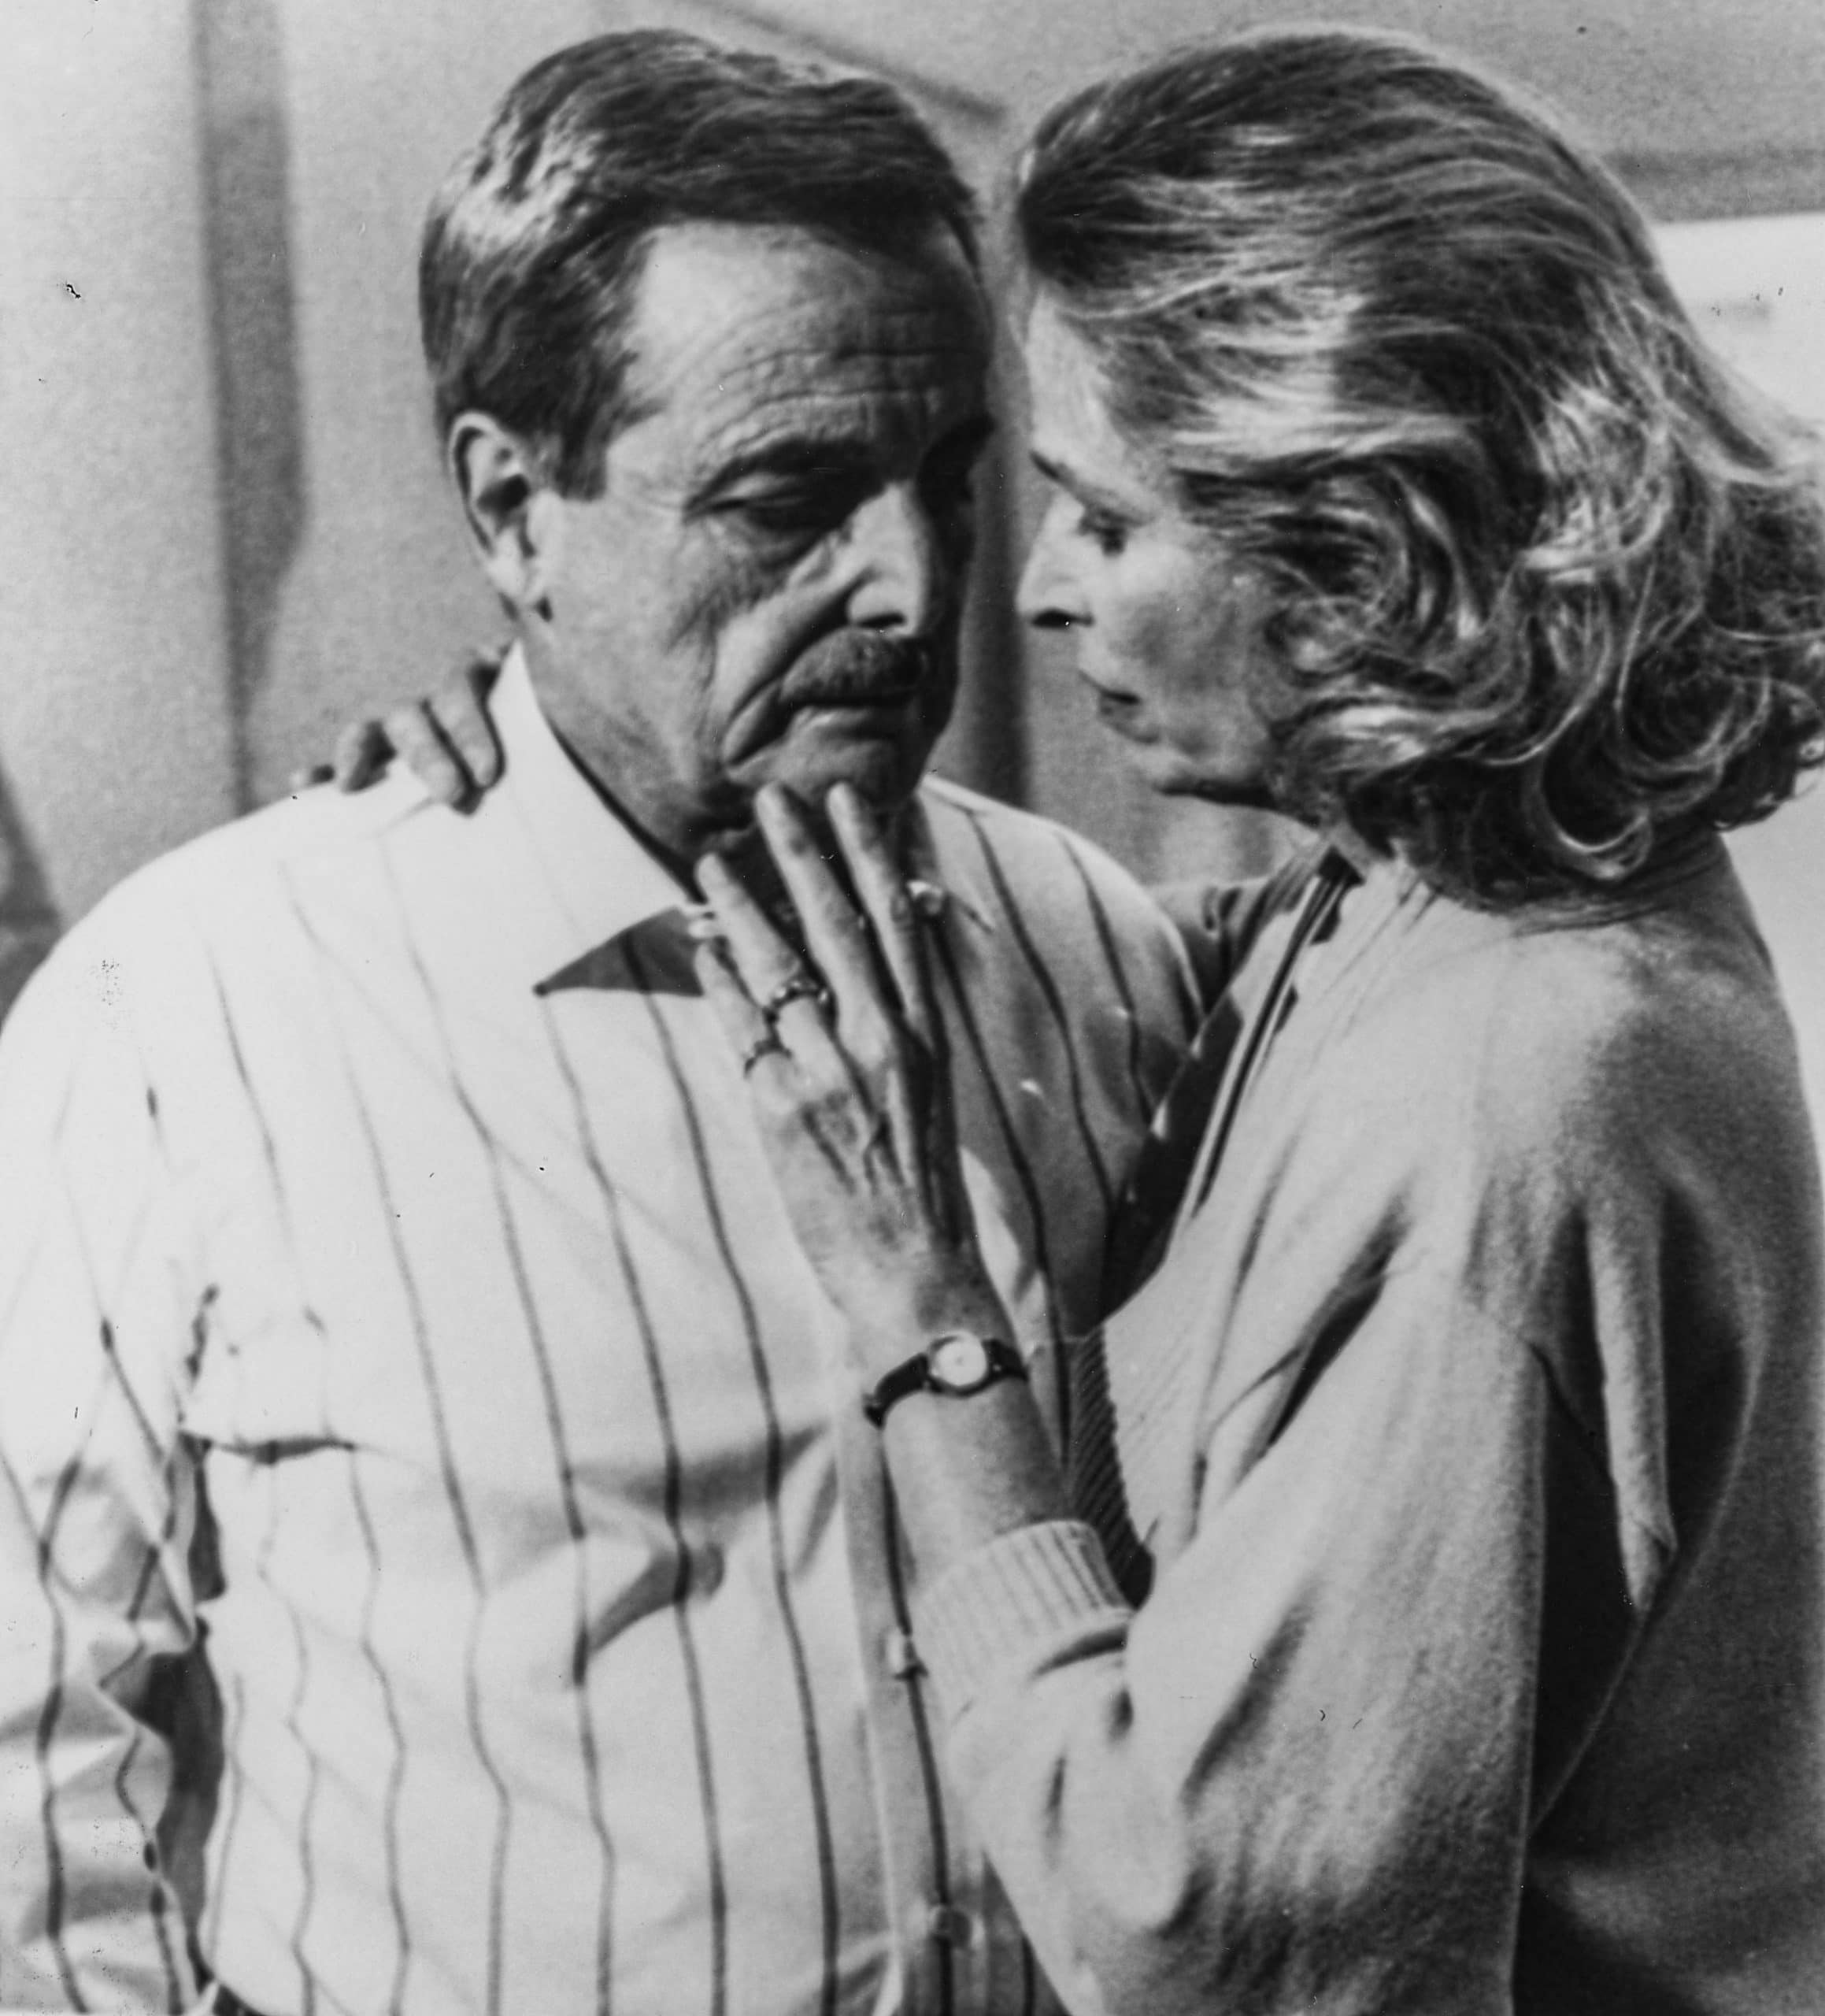 ST. ELSEWHERE, from left: William Daniels, Bonnie Bartlett,